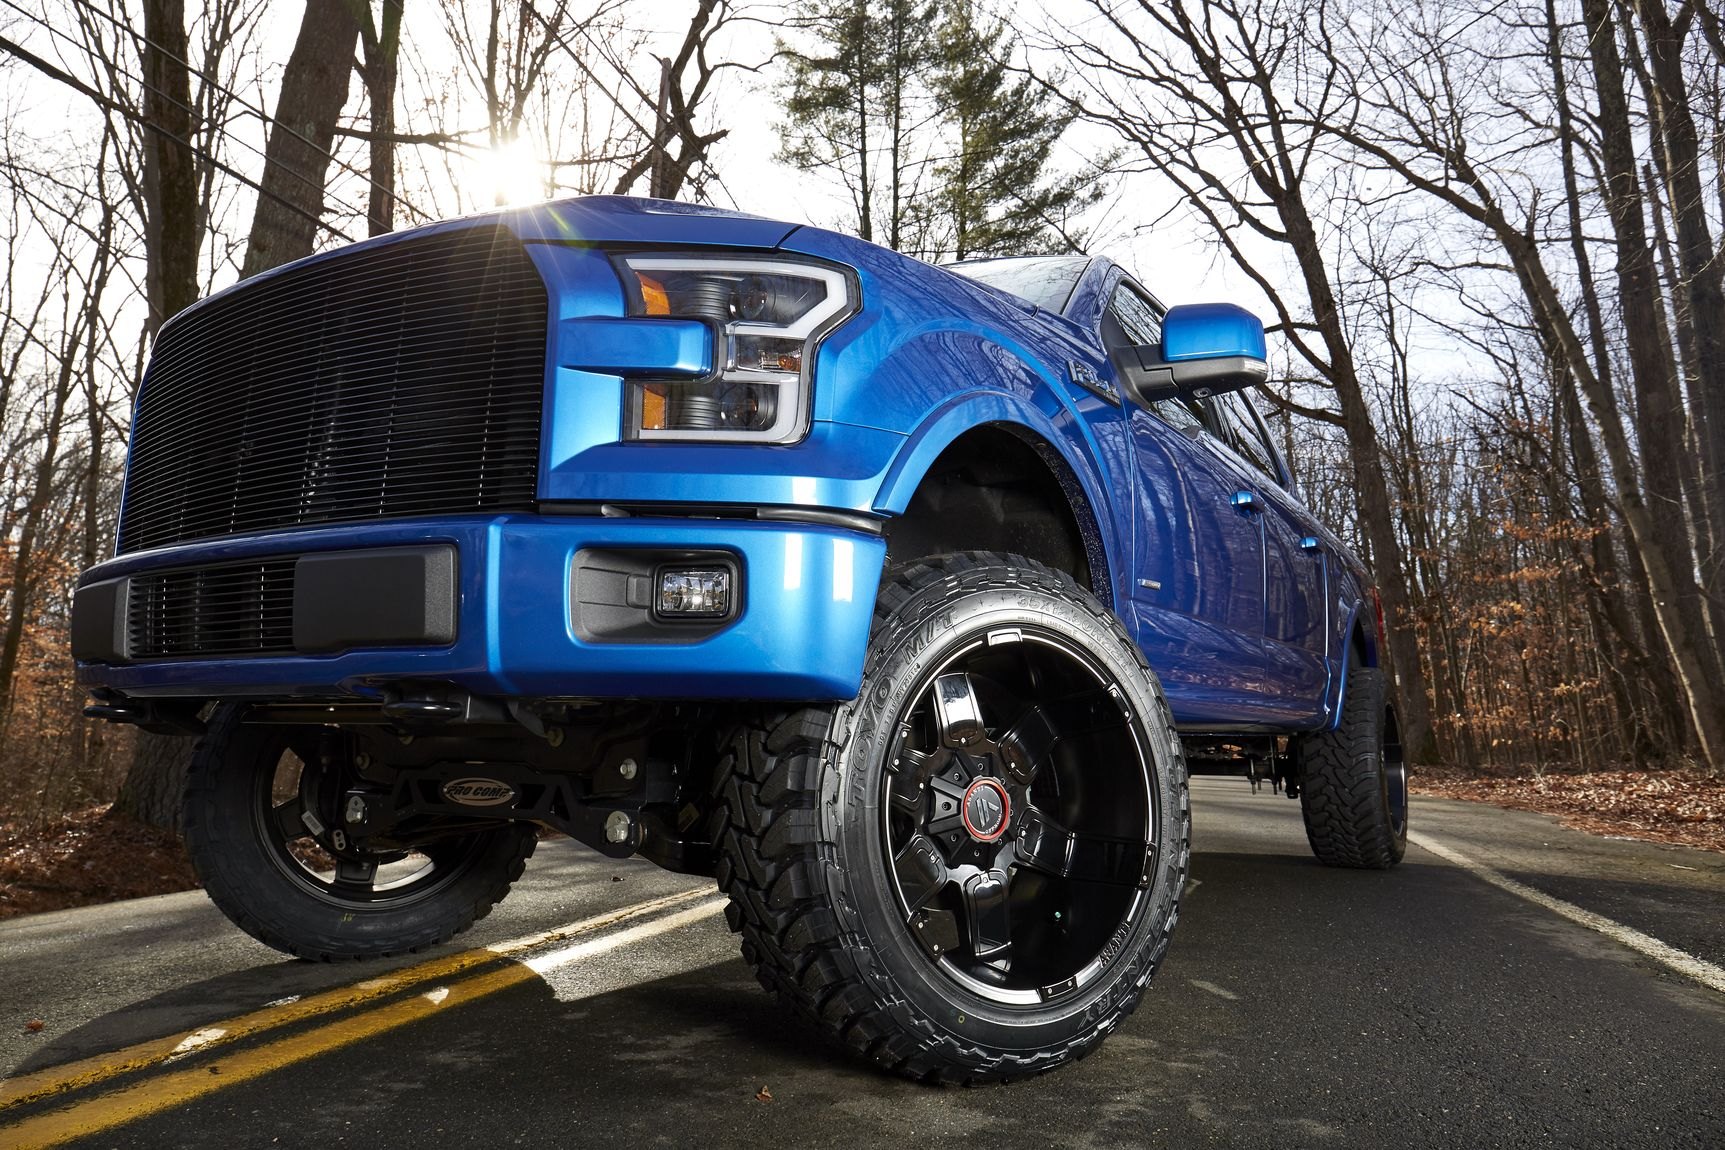 Toyo Open Country Tires on Blue Lifted Ford F-150 - Photo by CARiD